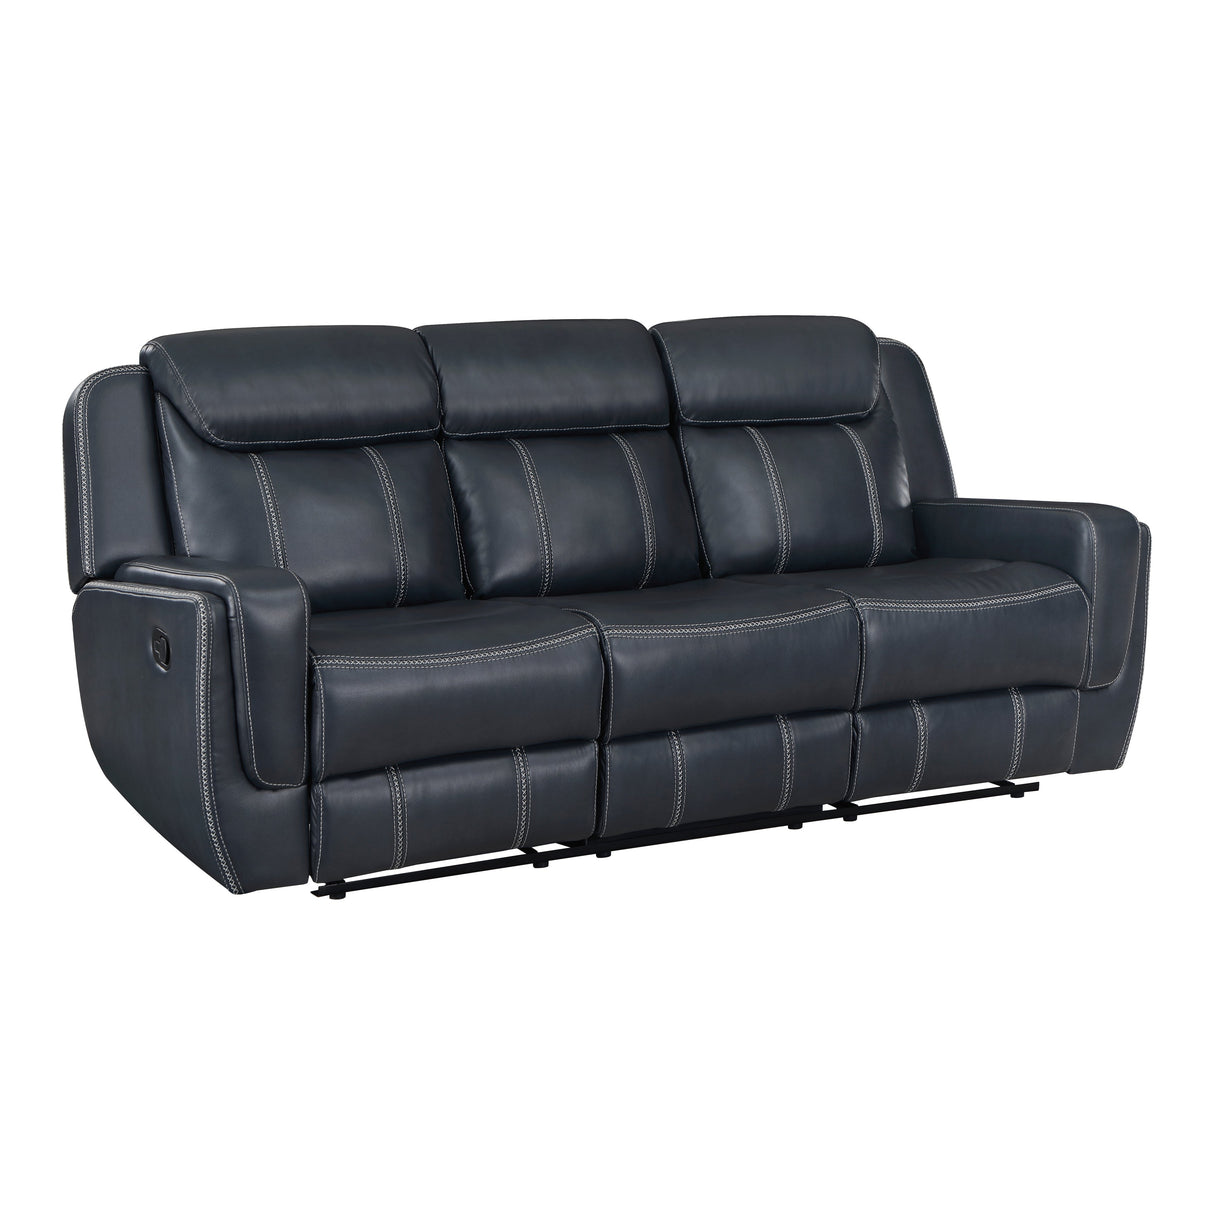 Littleton Blue Double Reclining Sofa with Center Drop-Down Cup Holders, Magazine bag, Receptacles and USB Ports